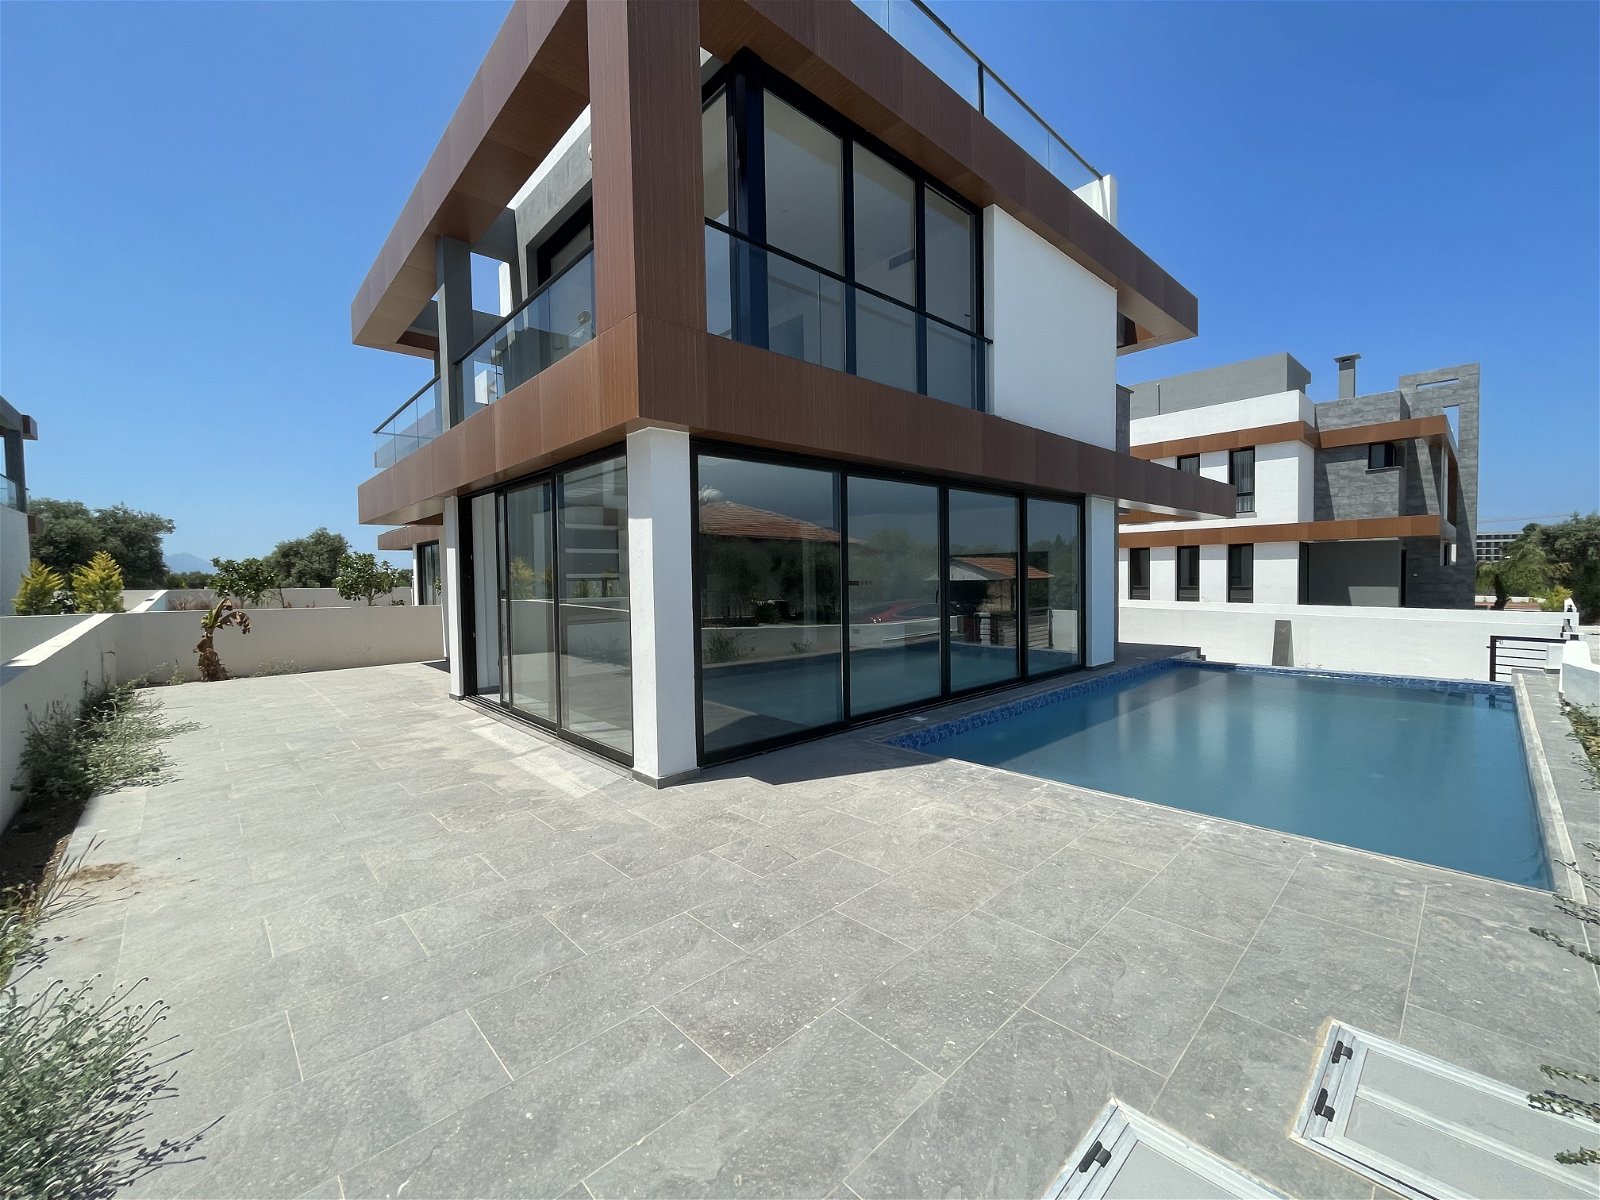 Luxury Villa for Sale in Catalkoy-2f222eef-9719-43d8-bfe9-150d346ebf2d